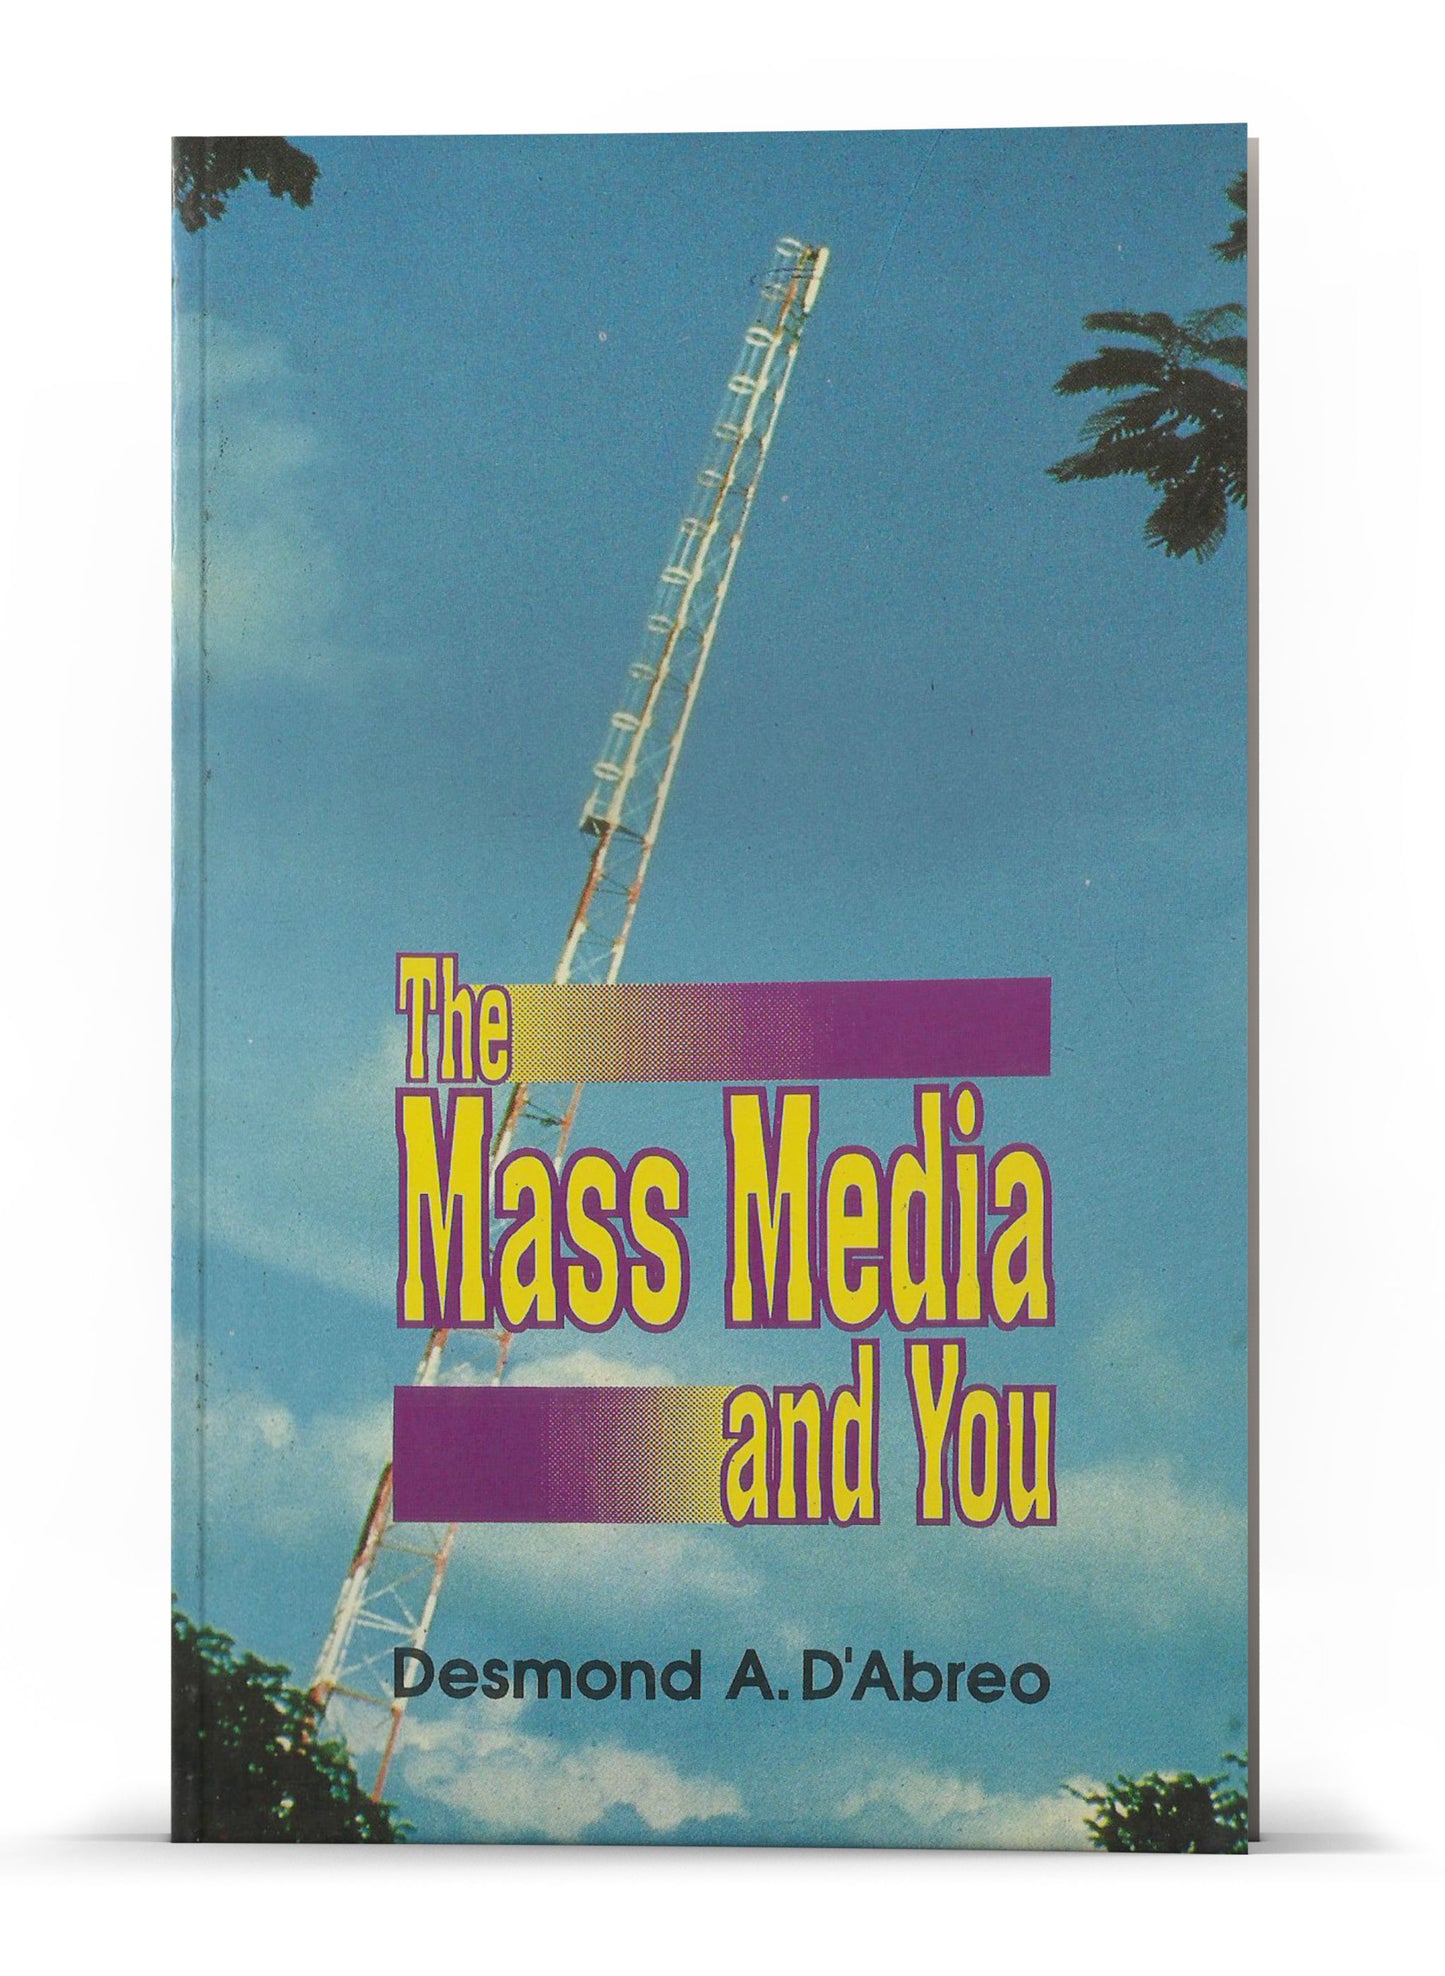 THE MASS MEDIA AND YOU